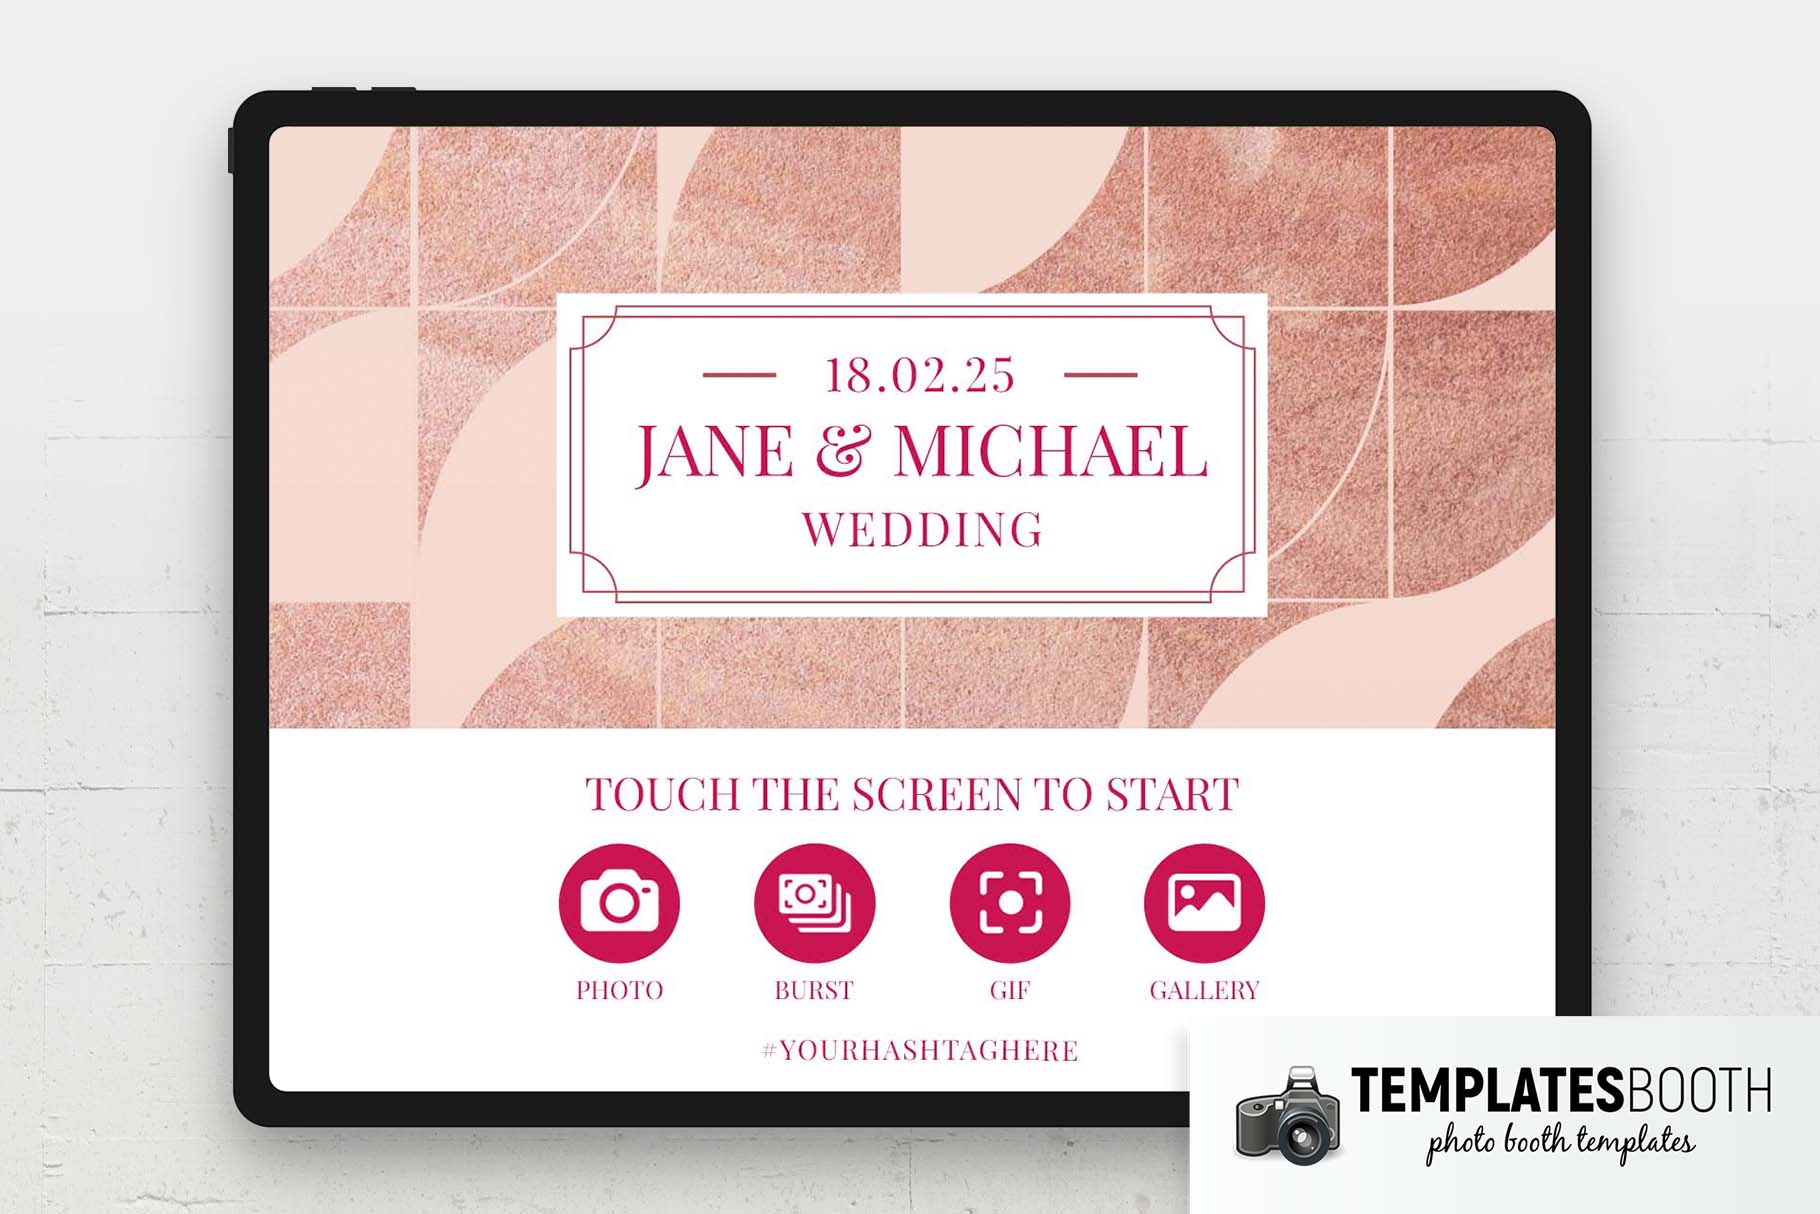 Rose Patterned Photo Booth Welcome Screen